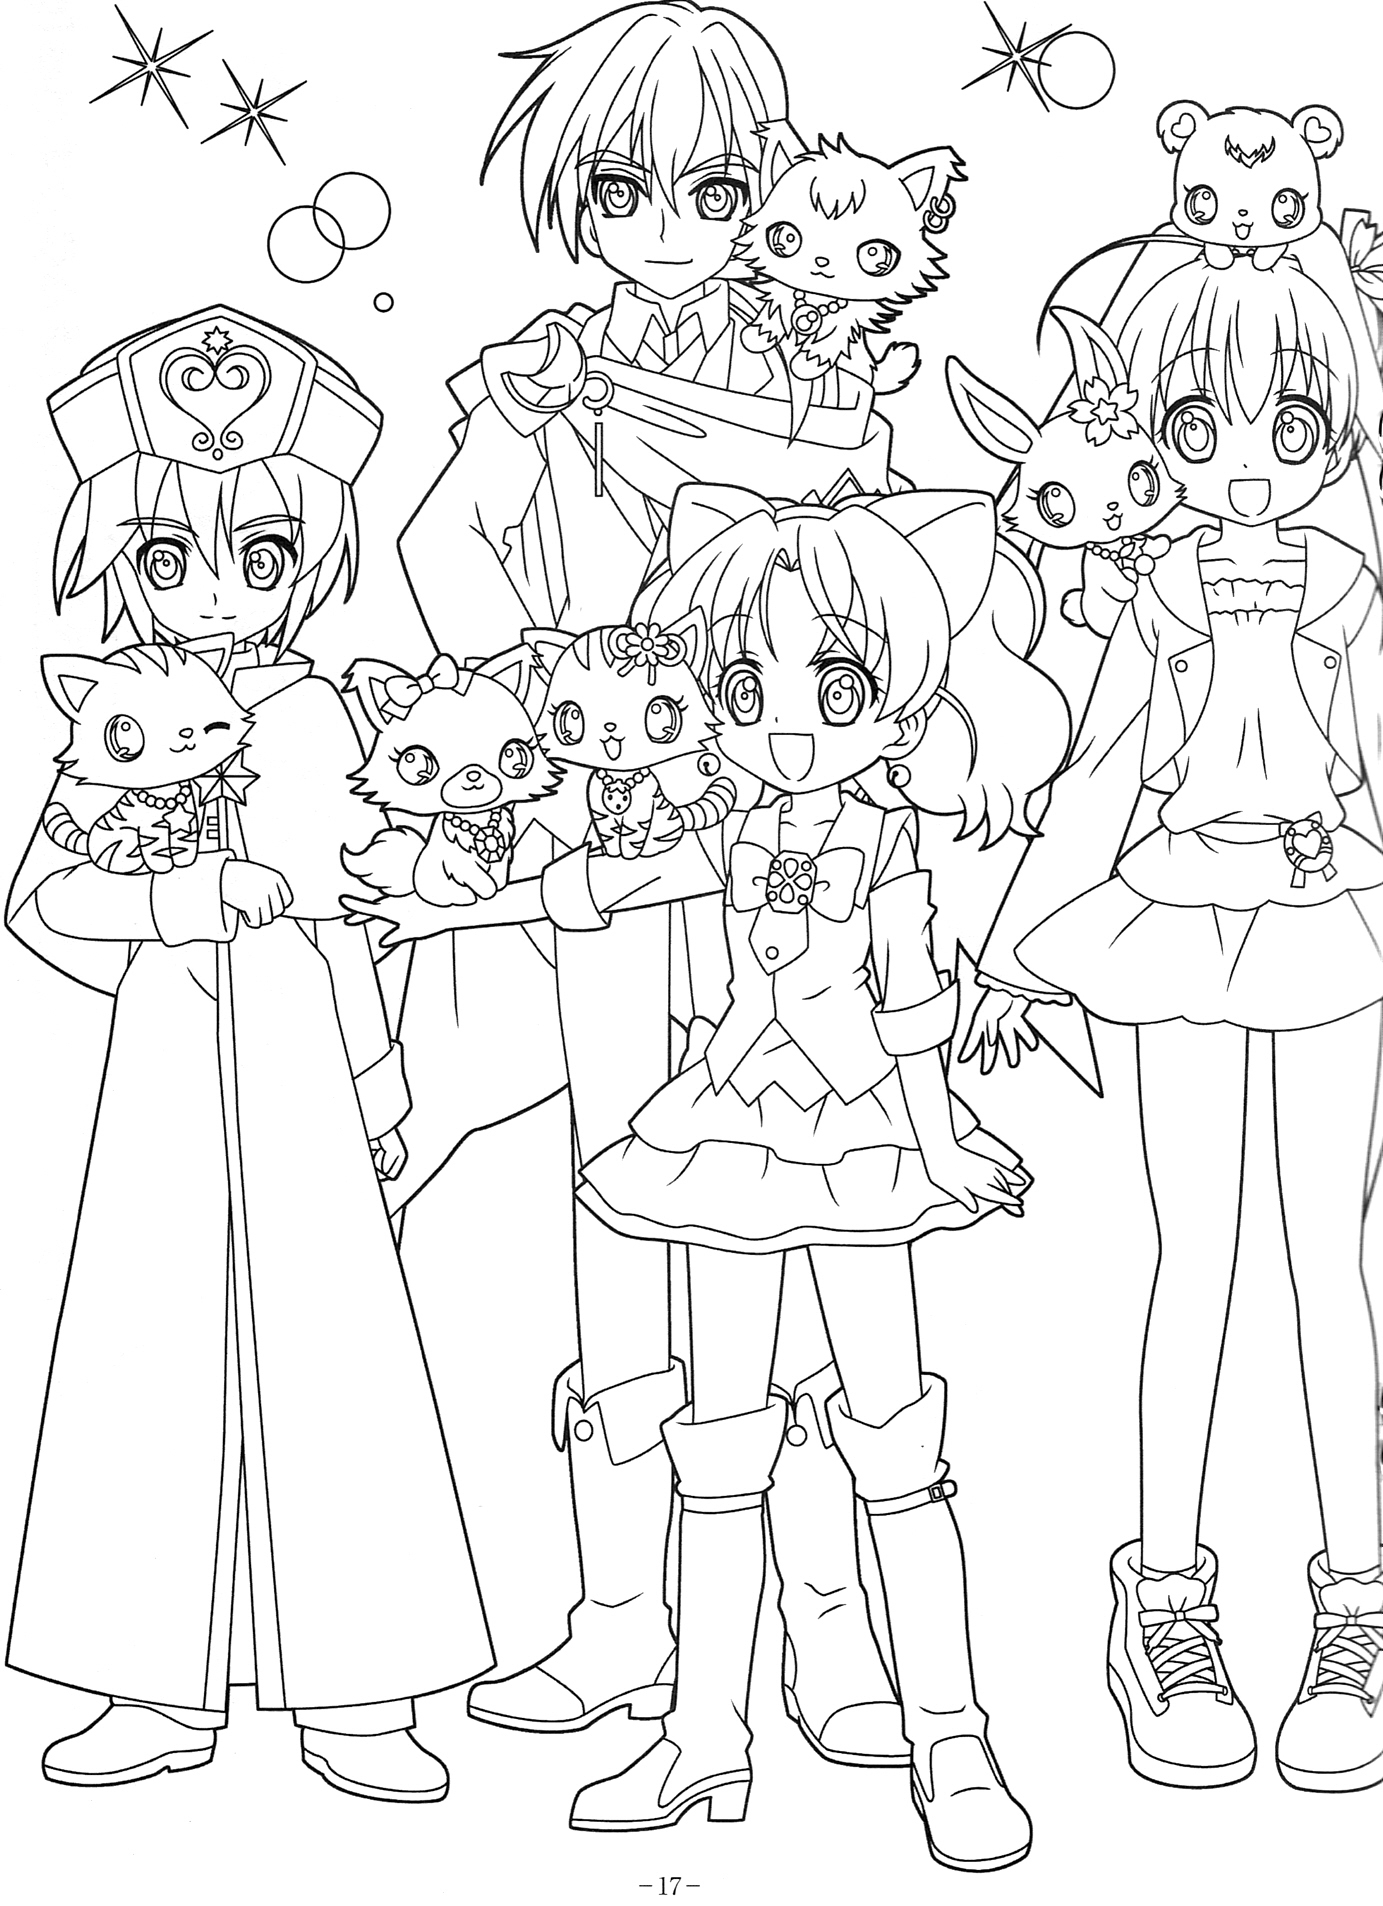 Drawing Jewelpet #37682 (Cartoons) – Printable coloring pages